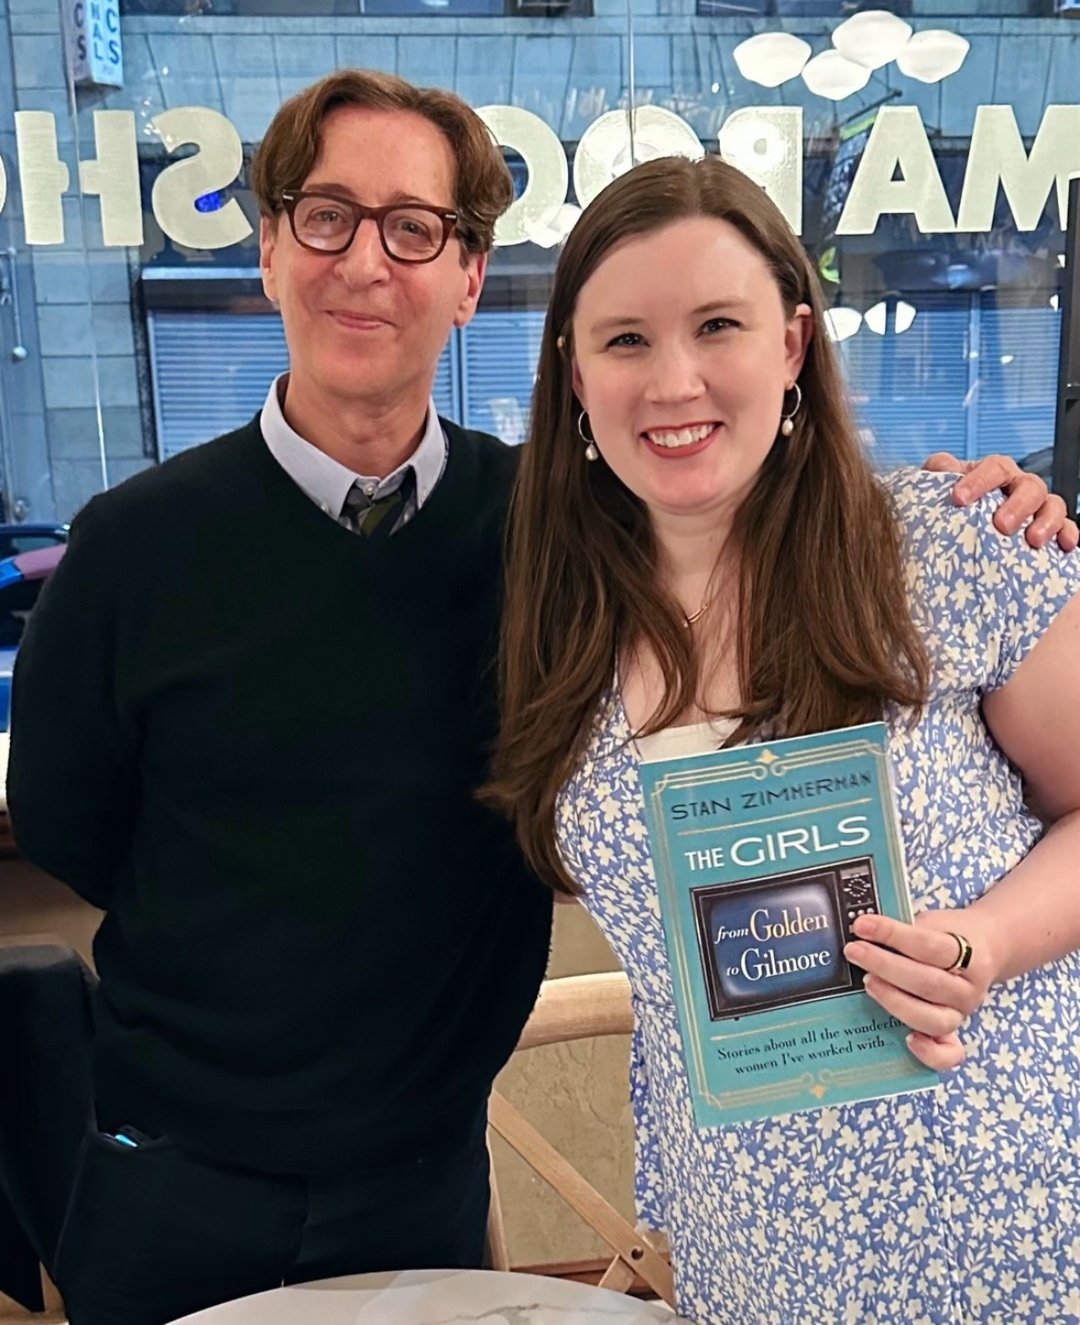 The Gilmore community is the best community! Like, comment, and share this post if you agree! 🩵

I was so excited to attend @zimmermanstan 's book discussion and signing. And there were some amazing Gilmore fans there too. 

P.S. I'm also really exc